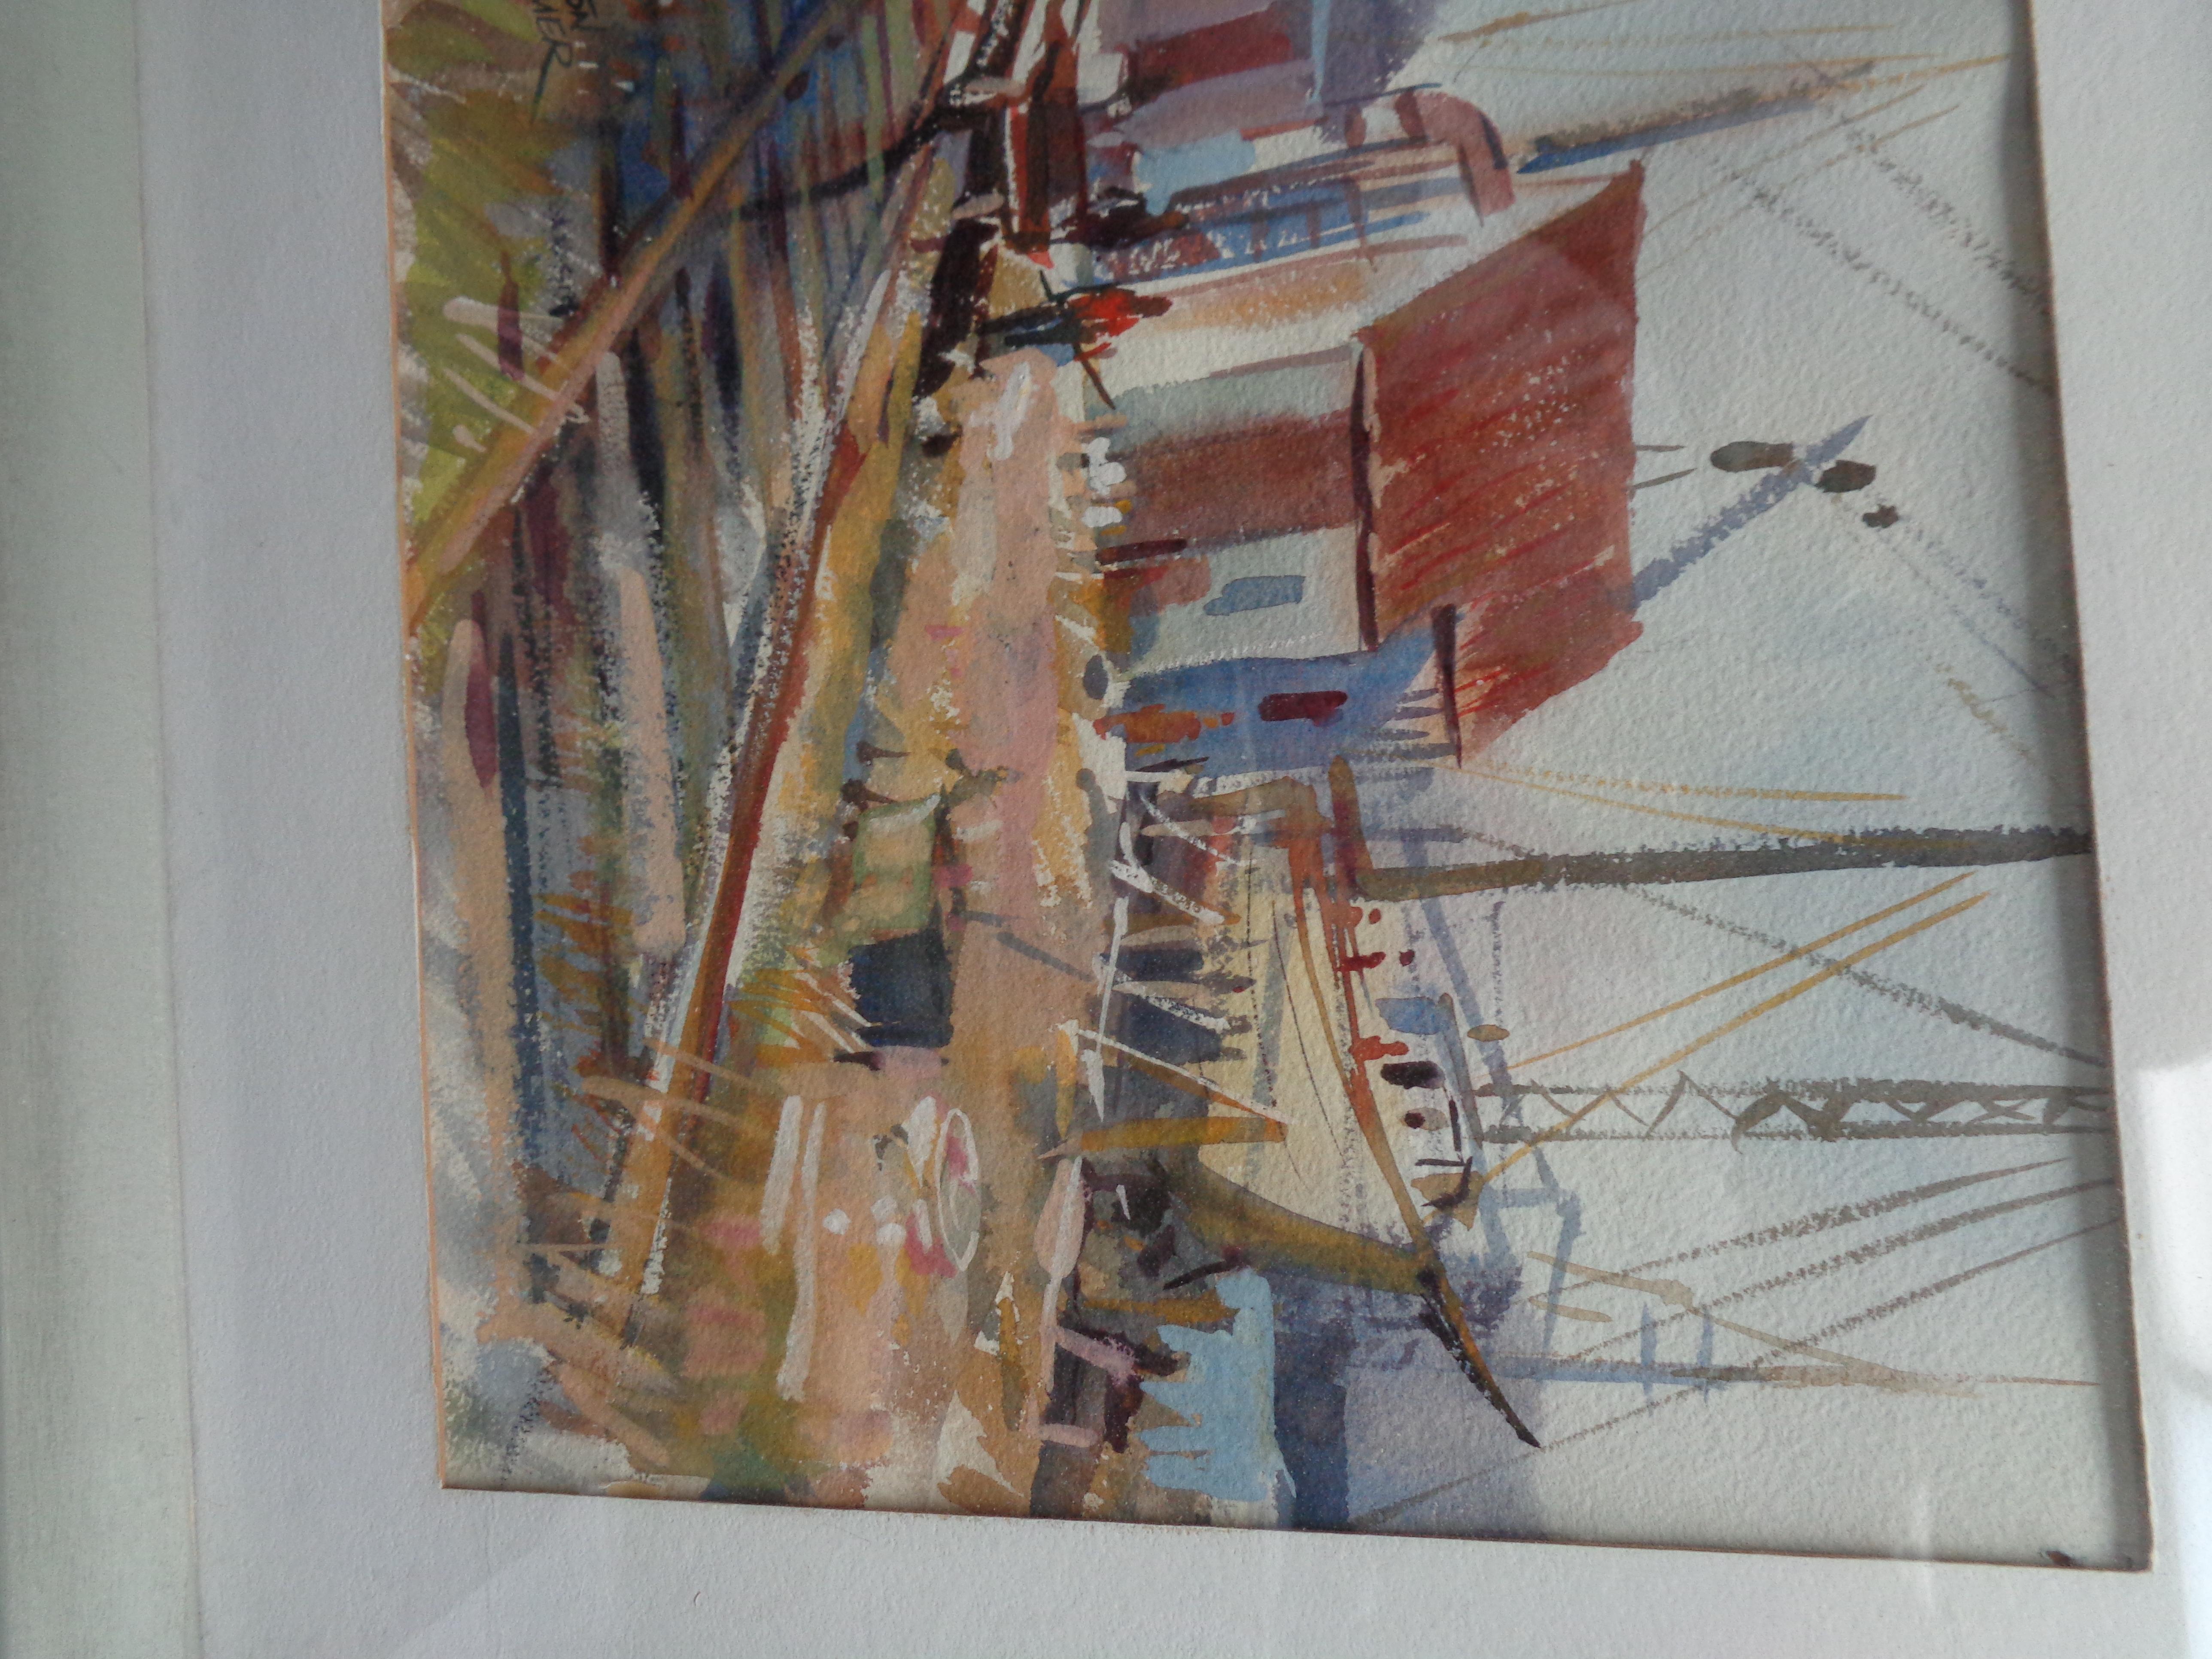 Maine Boatyard
watercolor from the Salmagundi Club with label
The mat and backing will need to be updated to help preserve this painting.

Here is what I can find out about the artist who recently passed away.
Carlton B. Plummer
Mon, 02/17/2020 -